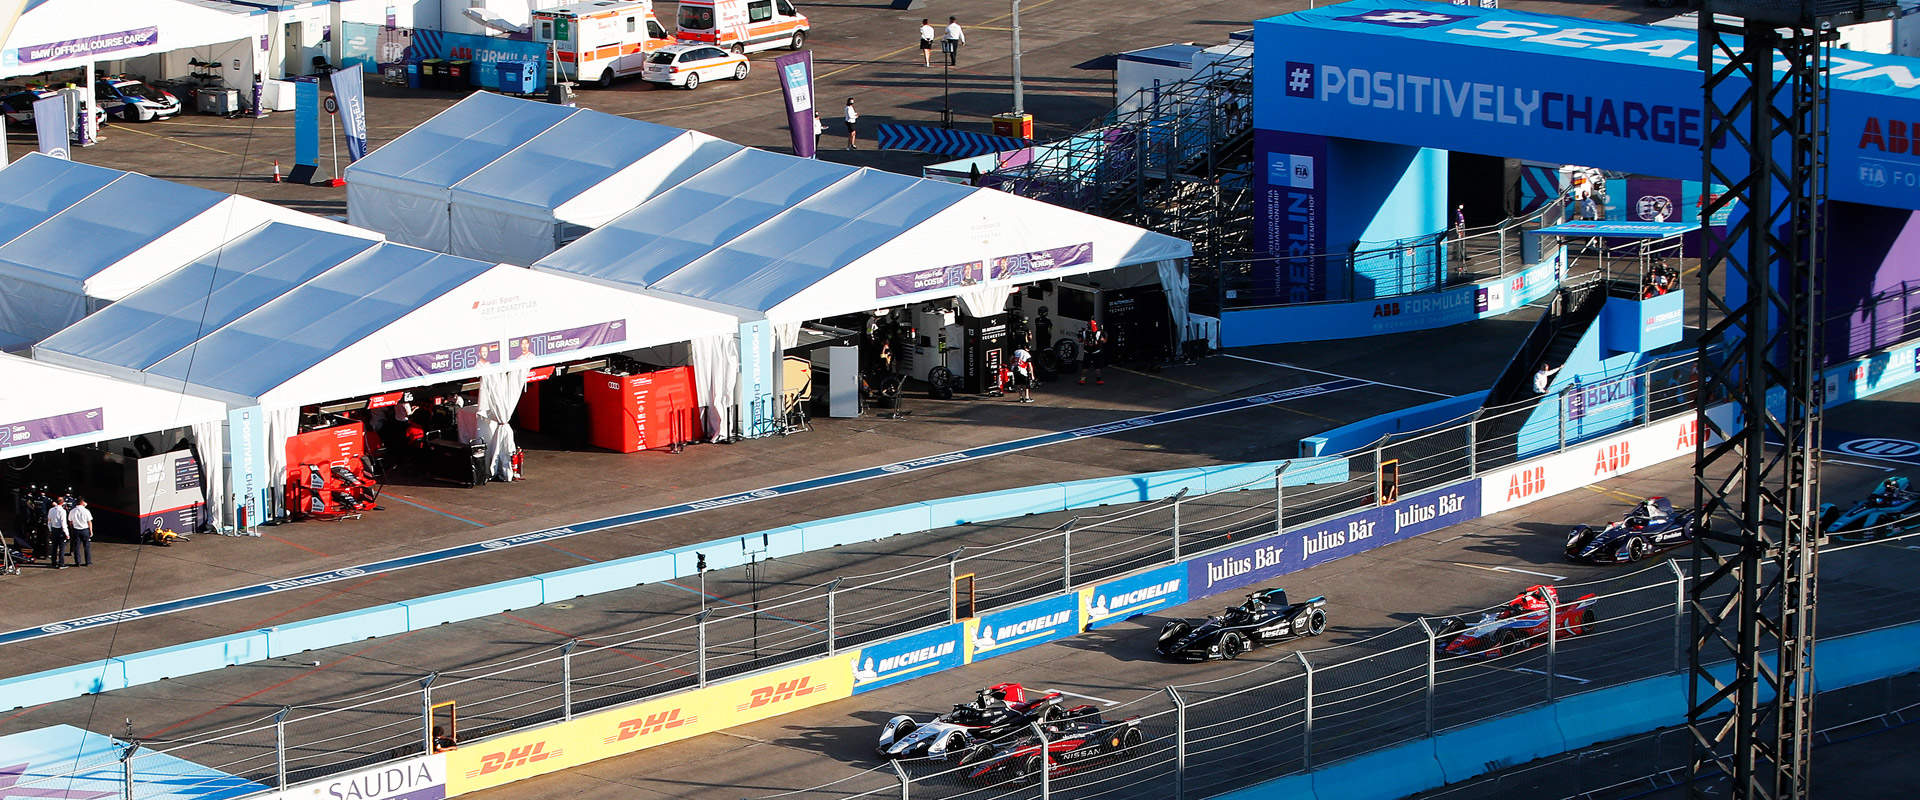 View of the pit lane with tent constructions by röder of the pits during Formula e in Berlin